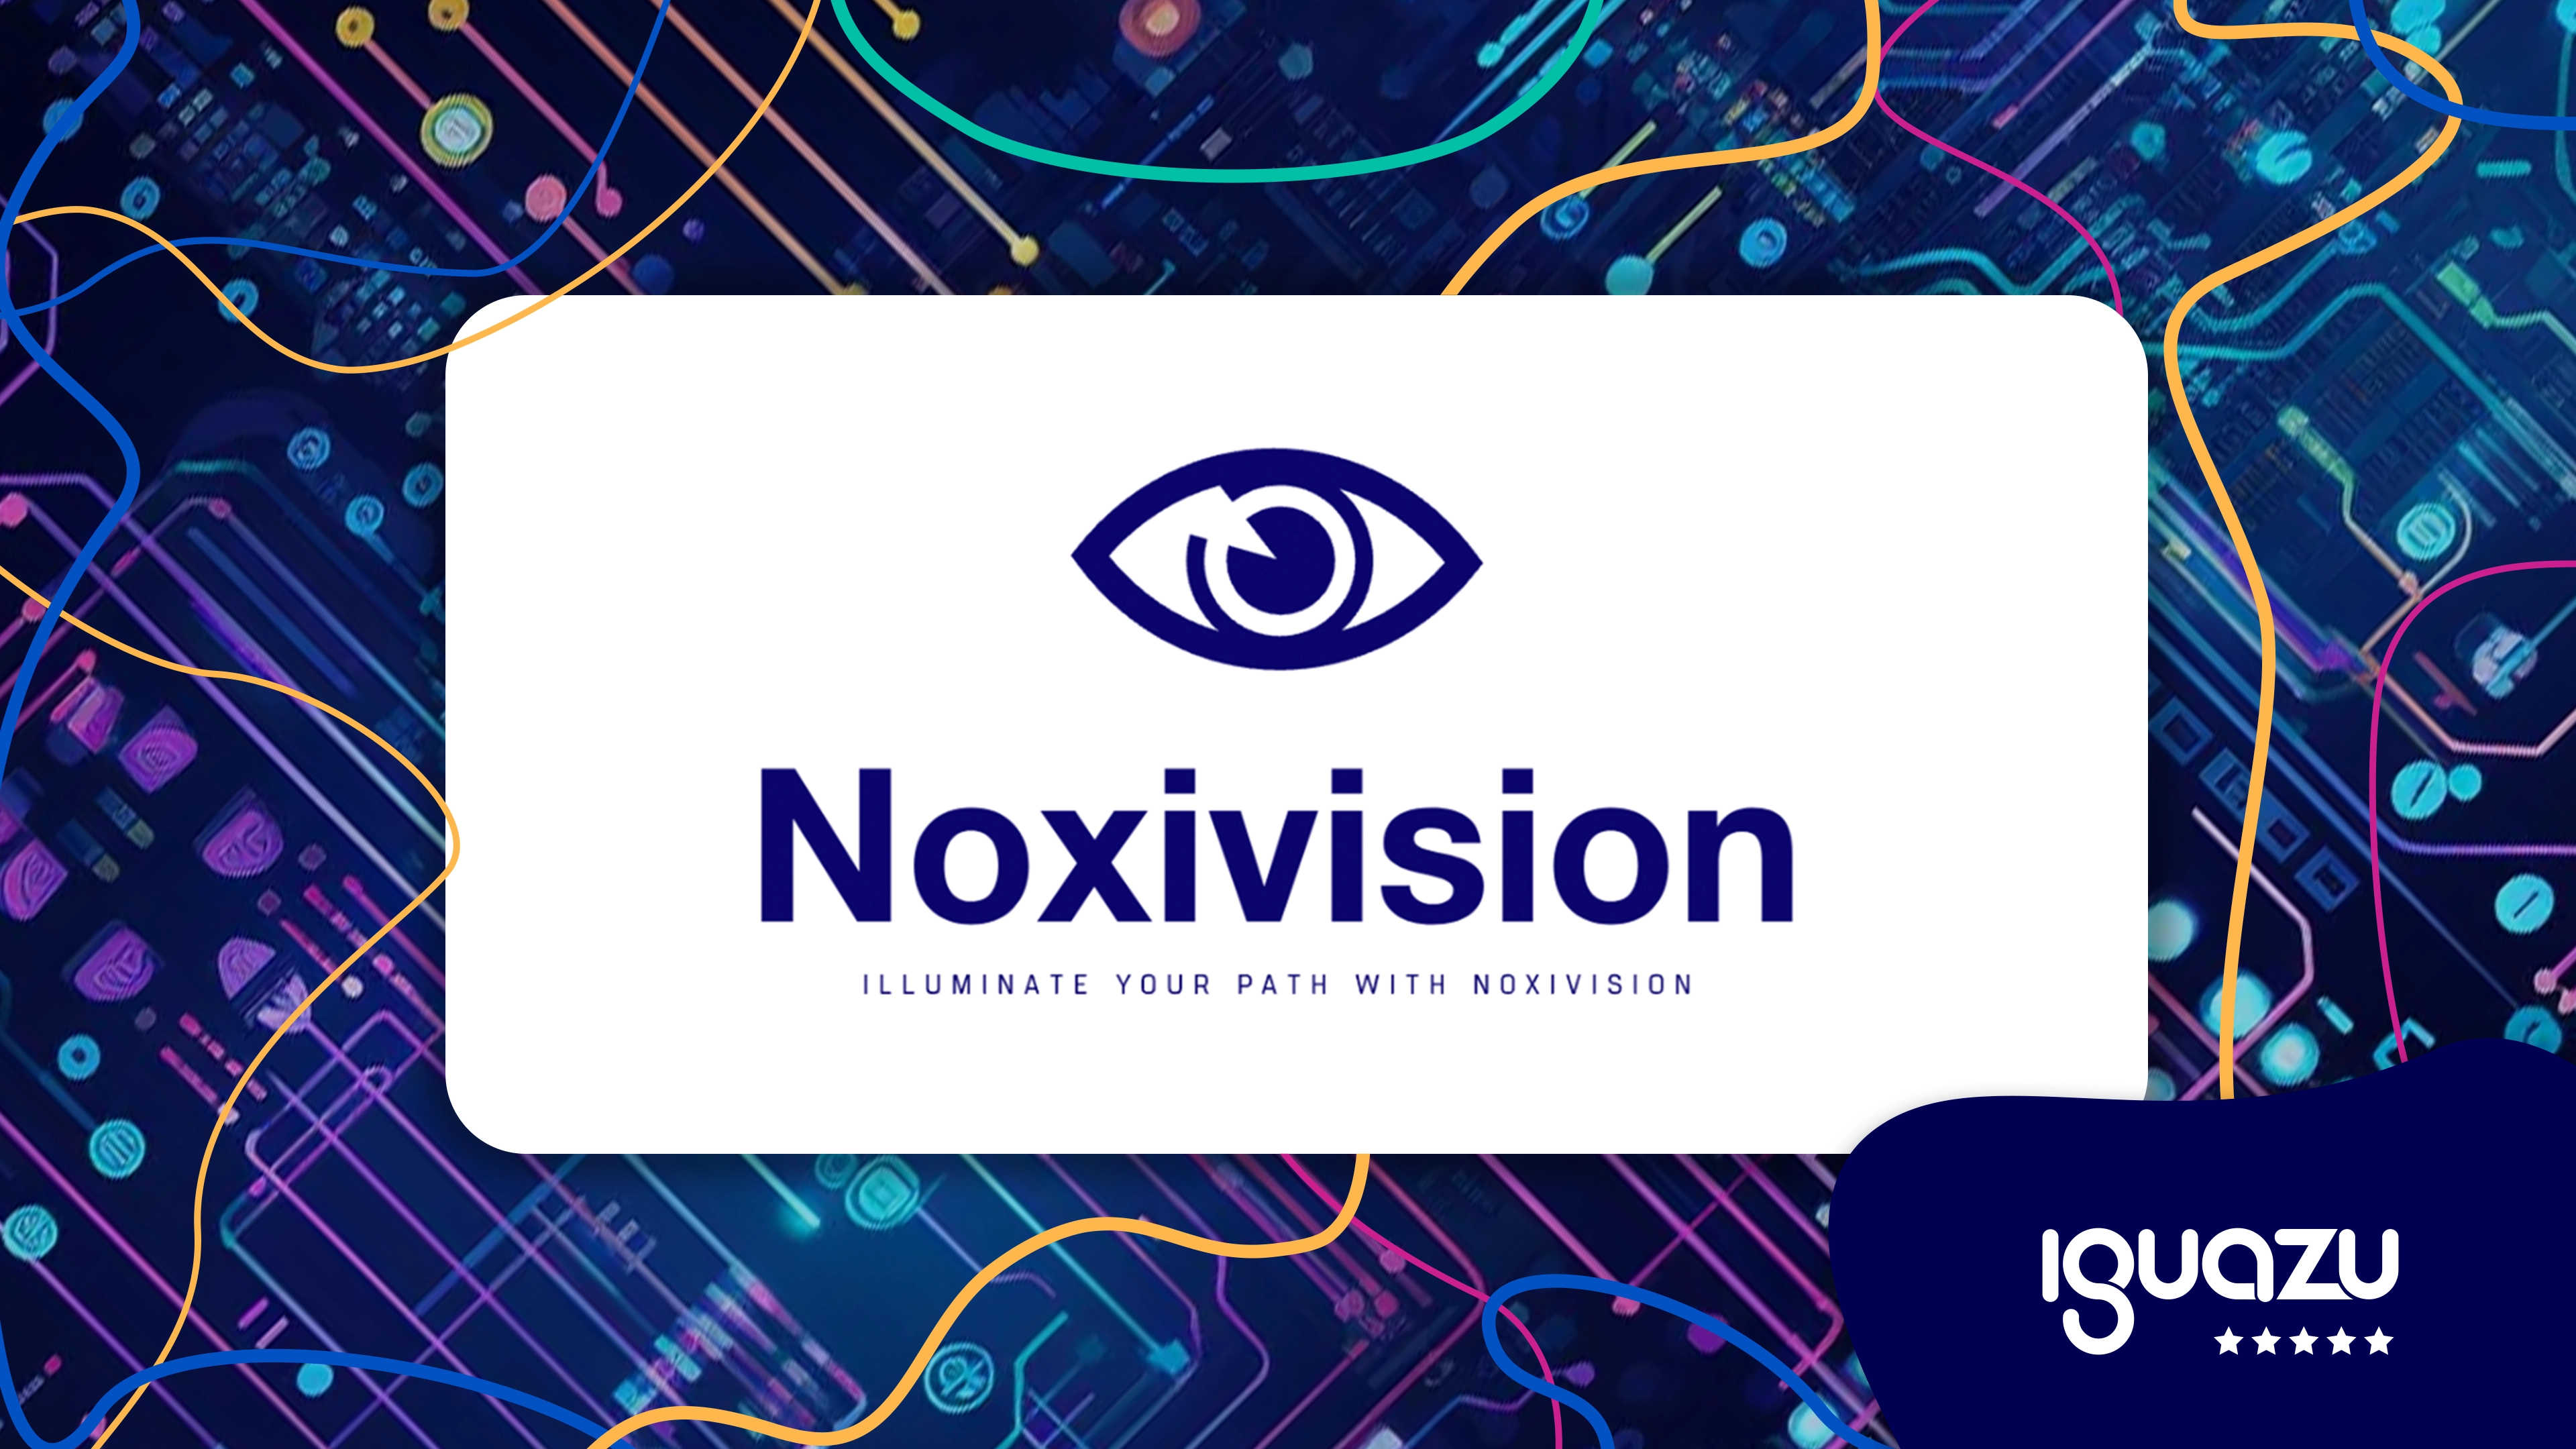 Eye icon - Noxivision - Illuminate your path with Noxivision on top of circuit board background